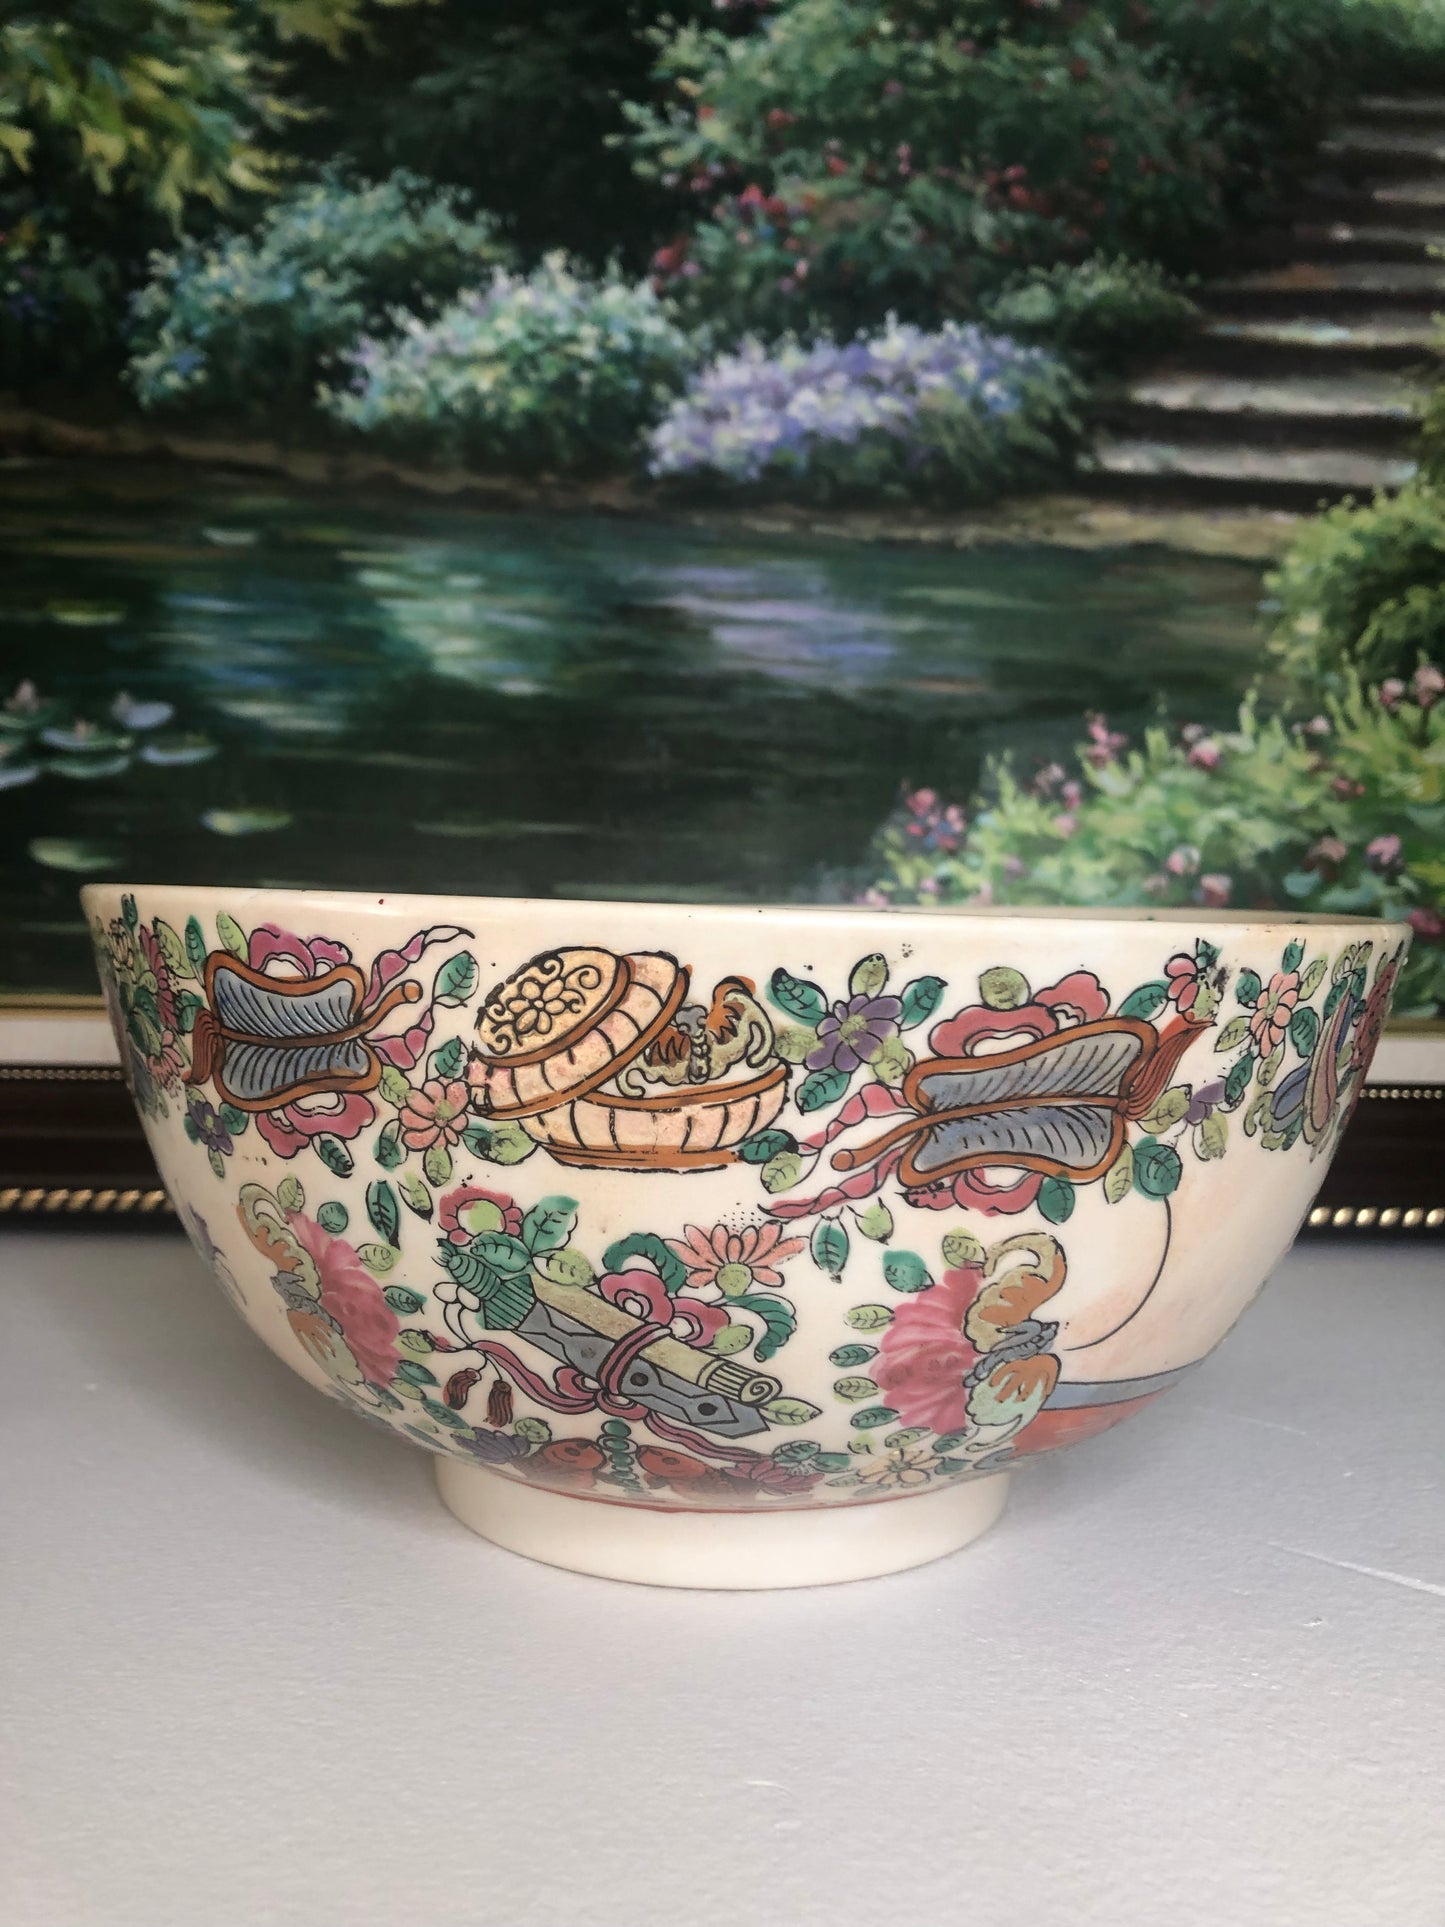 Stunning vintage Qing Dynasty Qianlong Famille Rose 10” Handpainted Bowl - Excellent condition!